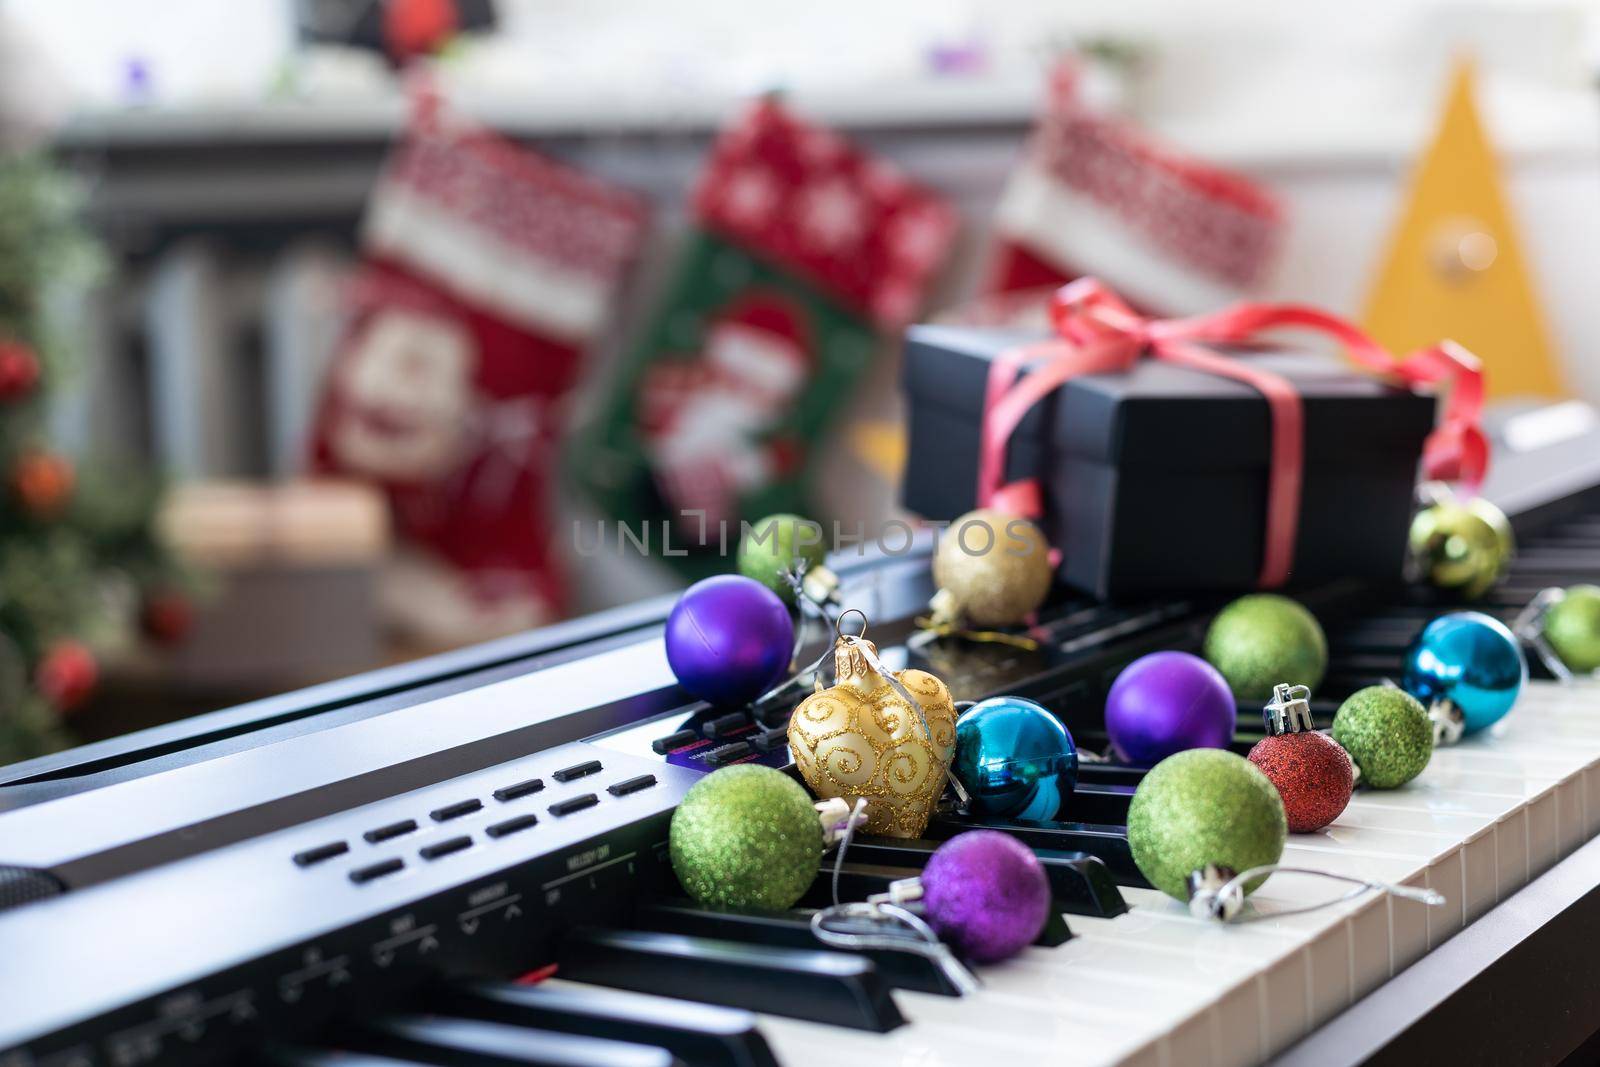 Piano keyboard with Christmas decoration, closeup by Andelov13